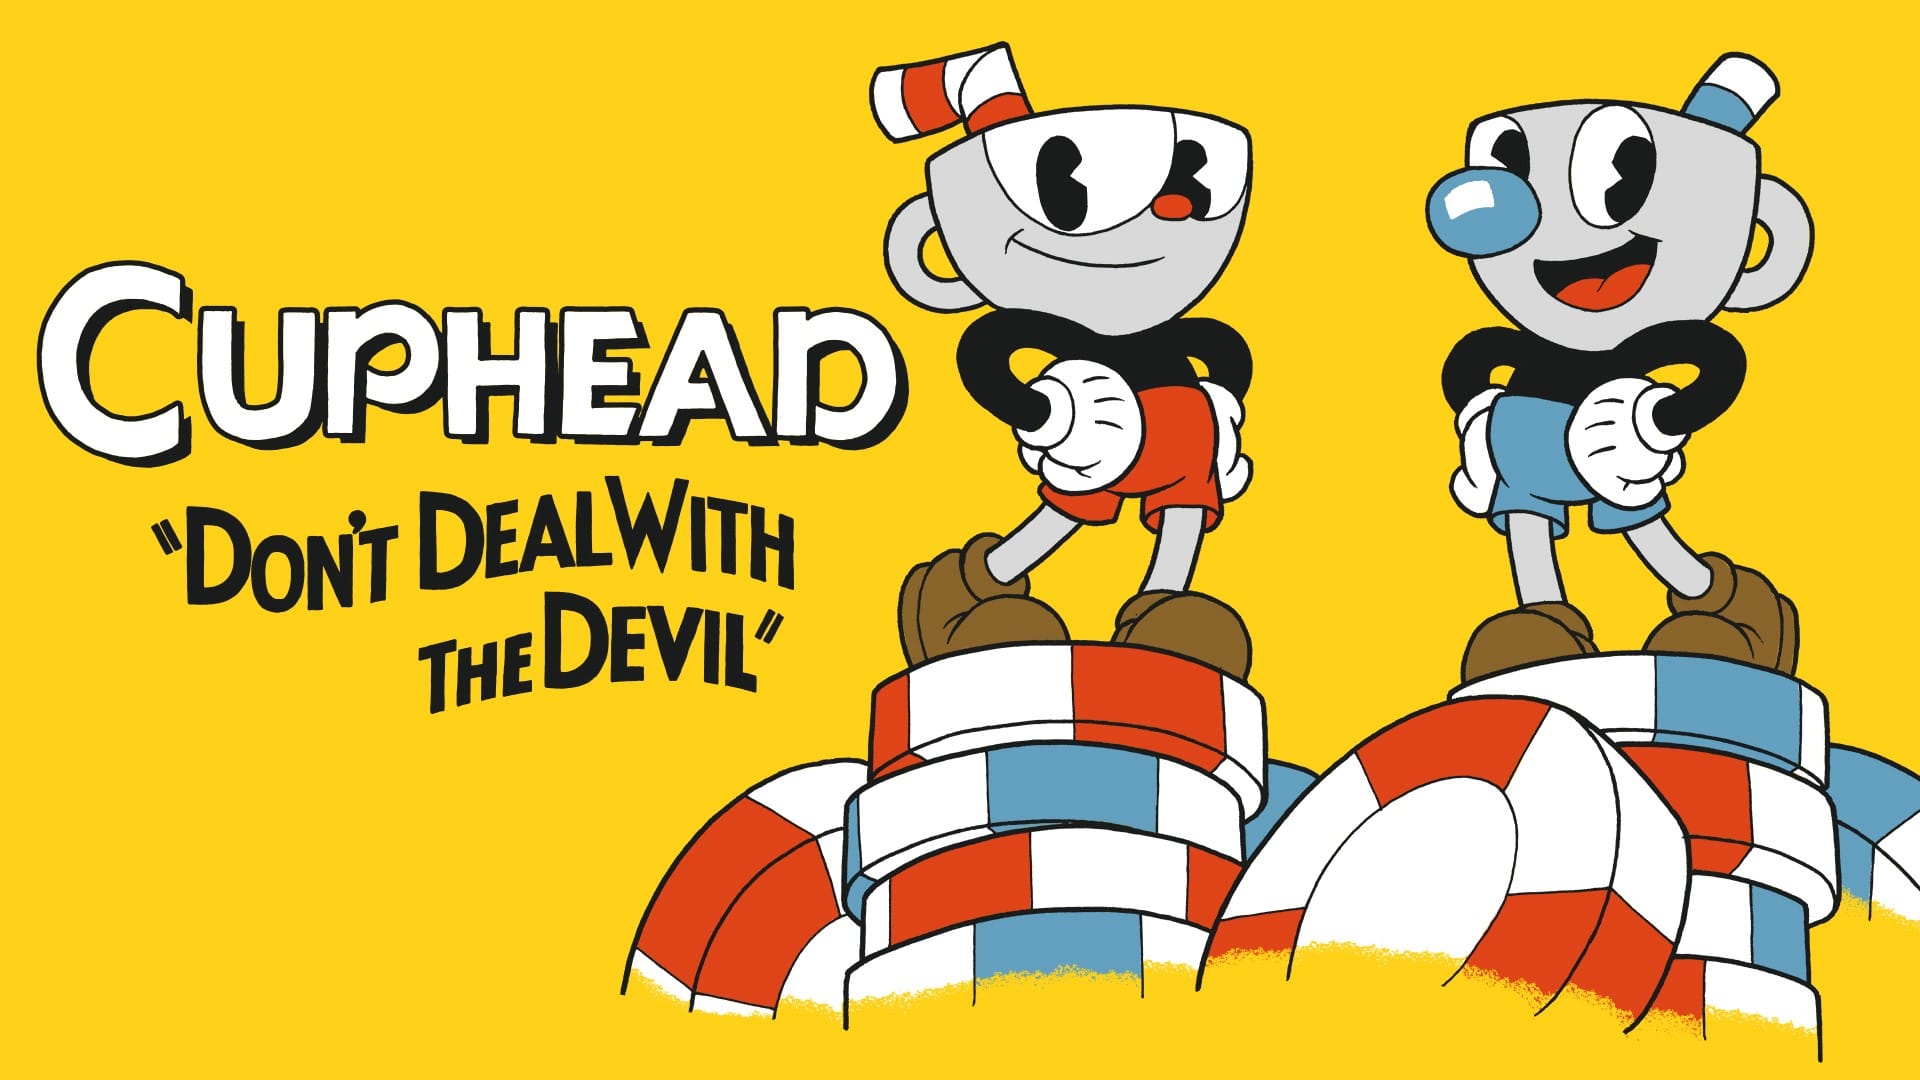 The main characters of Cuphead standing on a yellow background